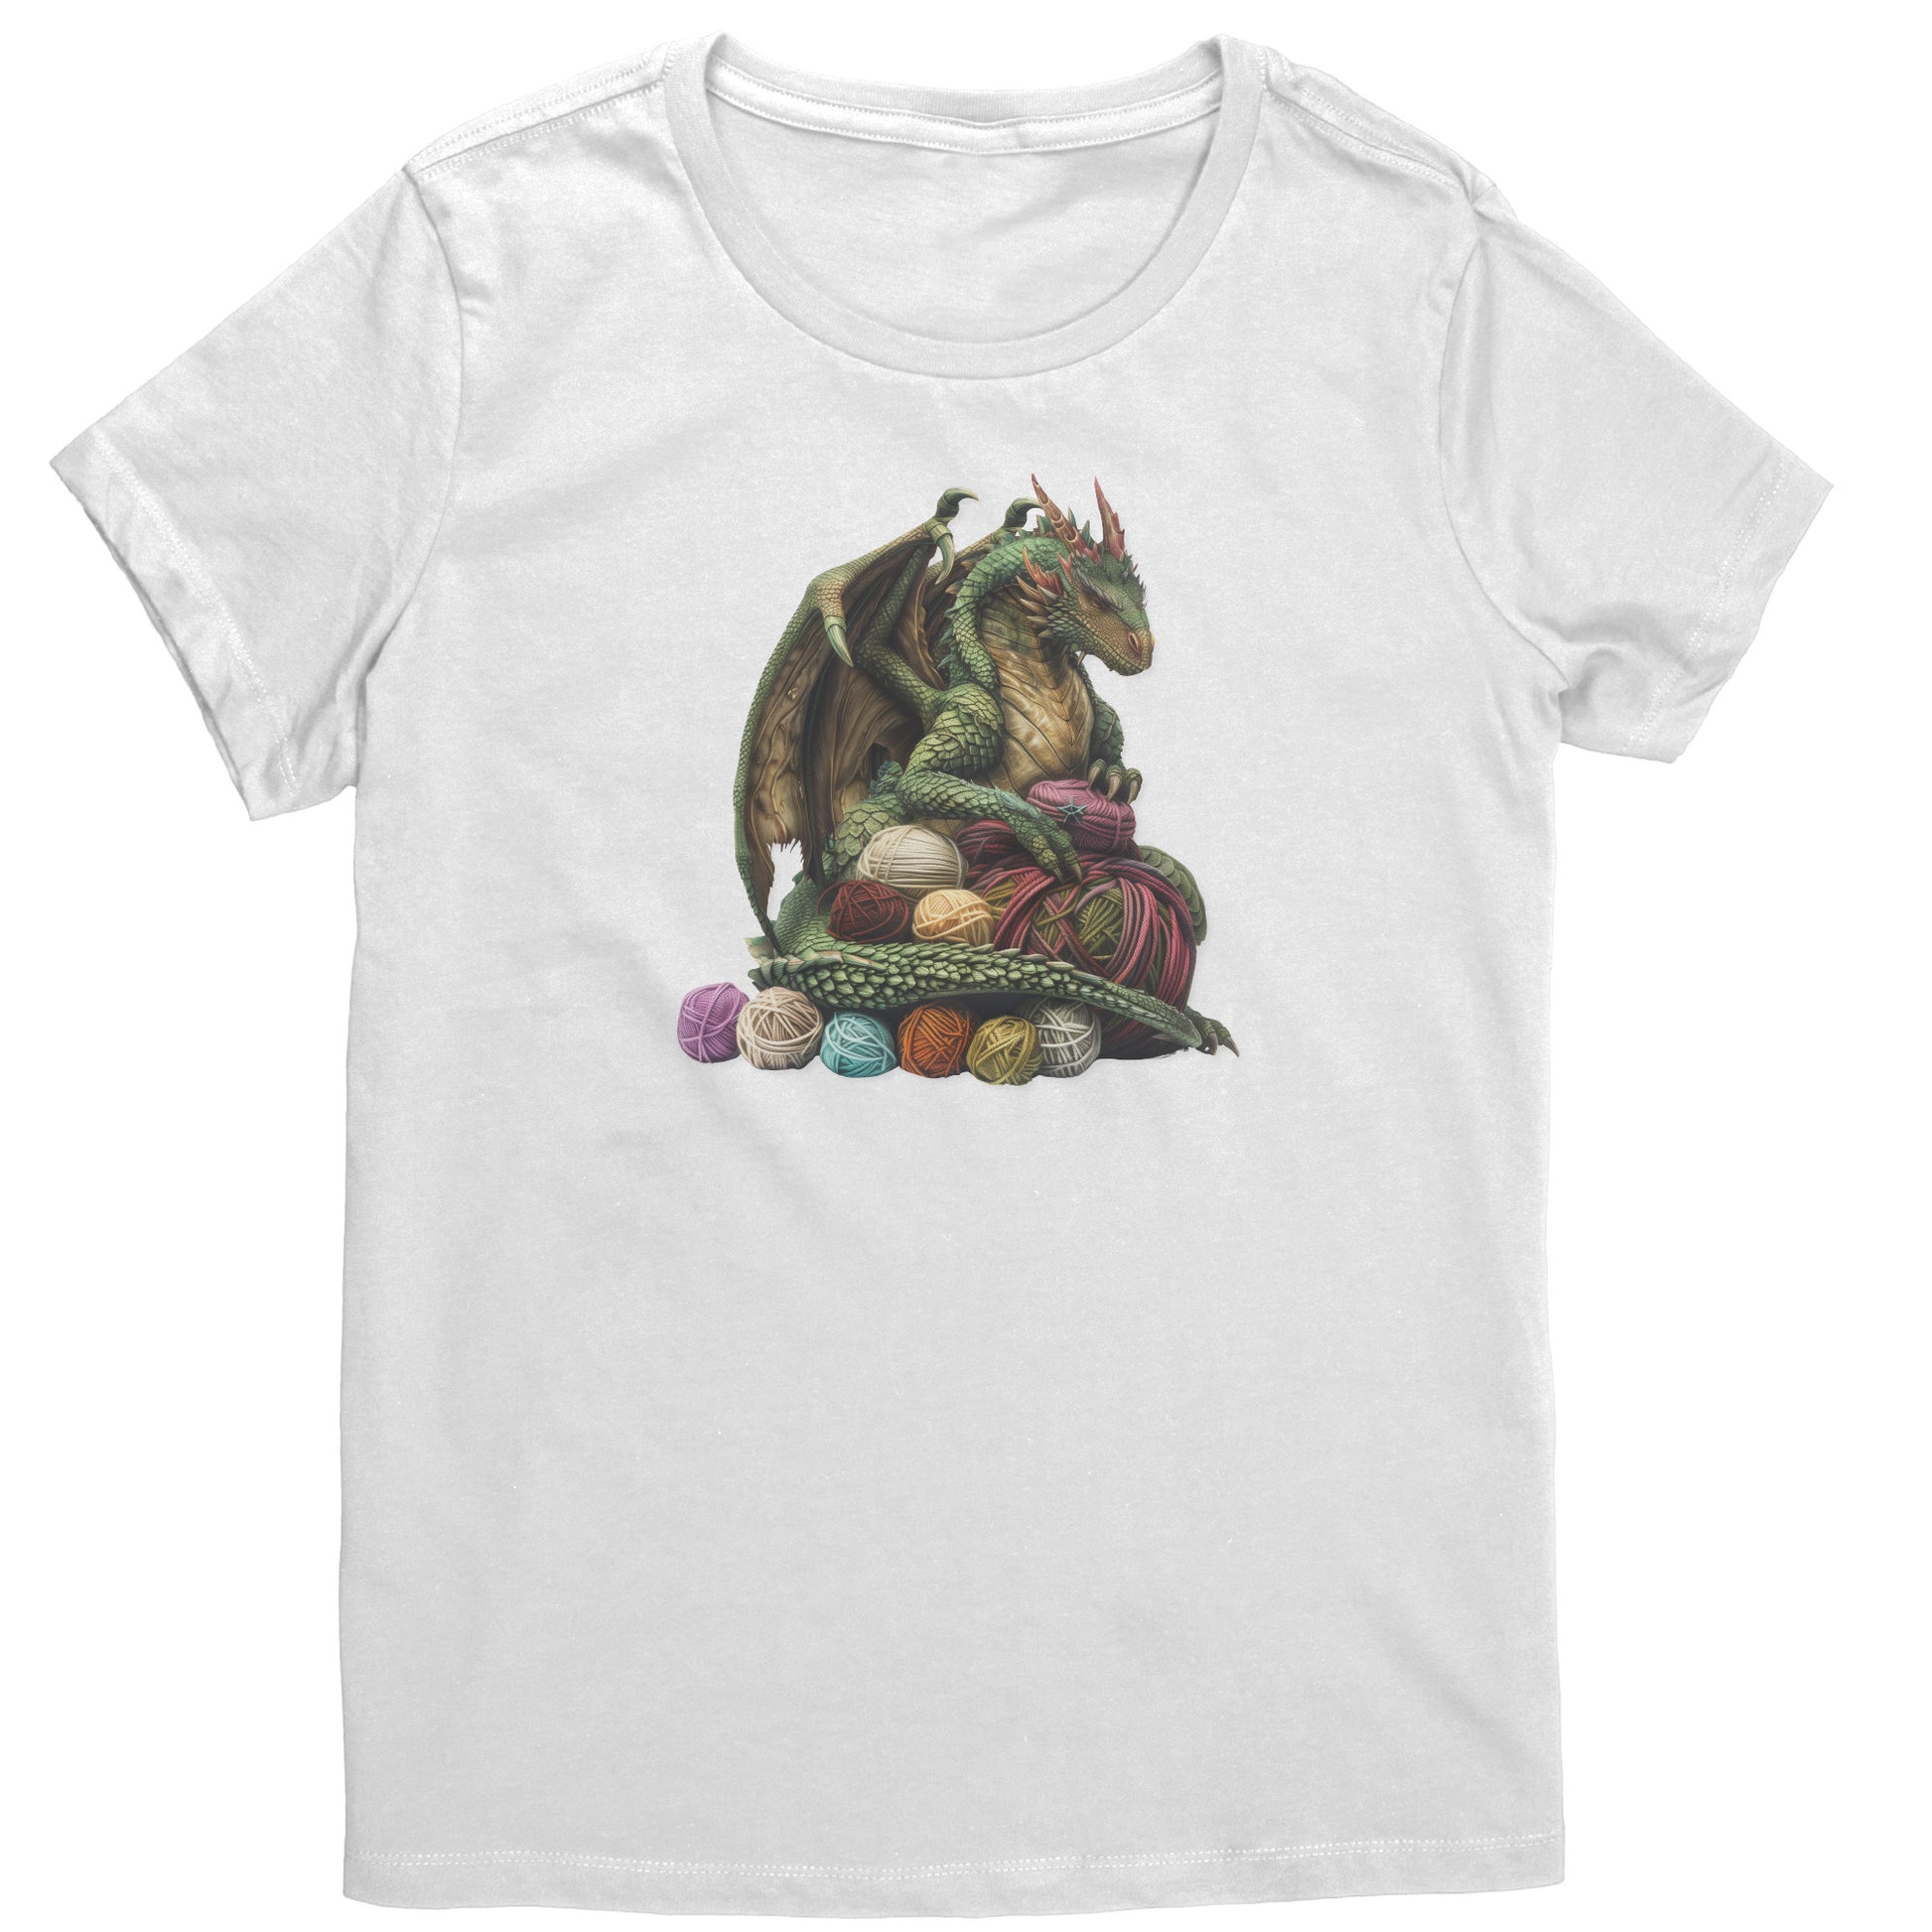 Light gray Custom - Green Dragon Guarding Yarn Balls Woman's Cut Shirt crafted from combed ring spun cotton for everyday wear.